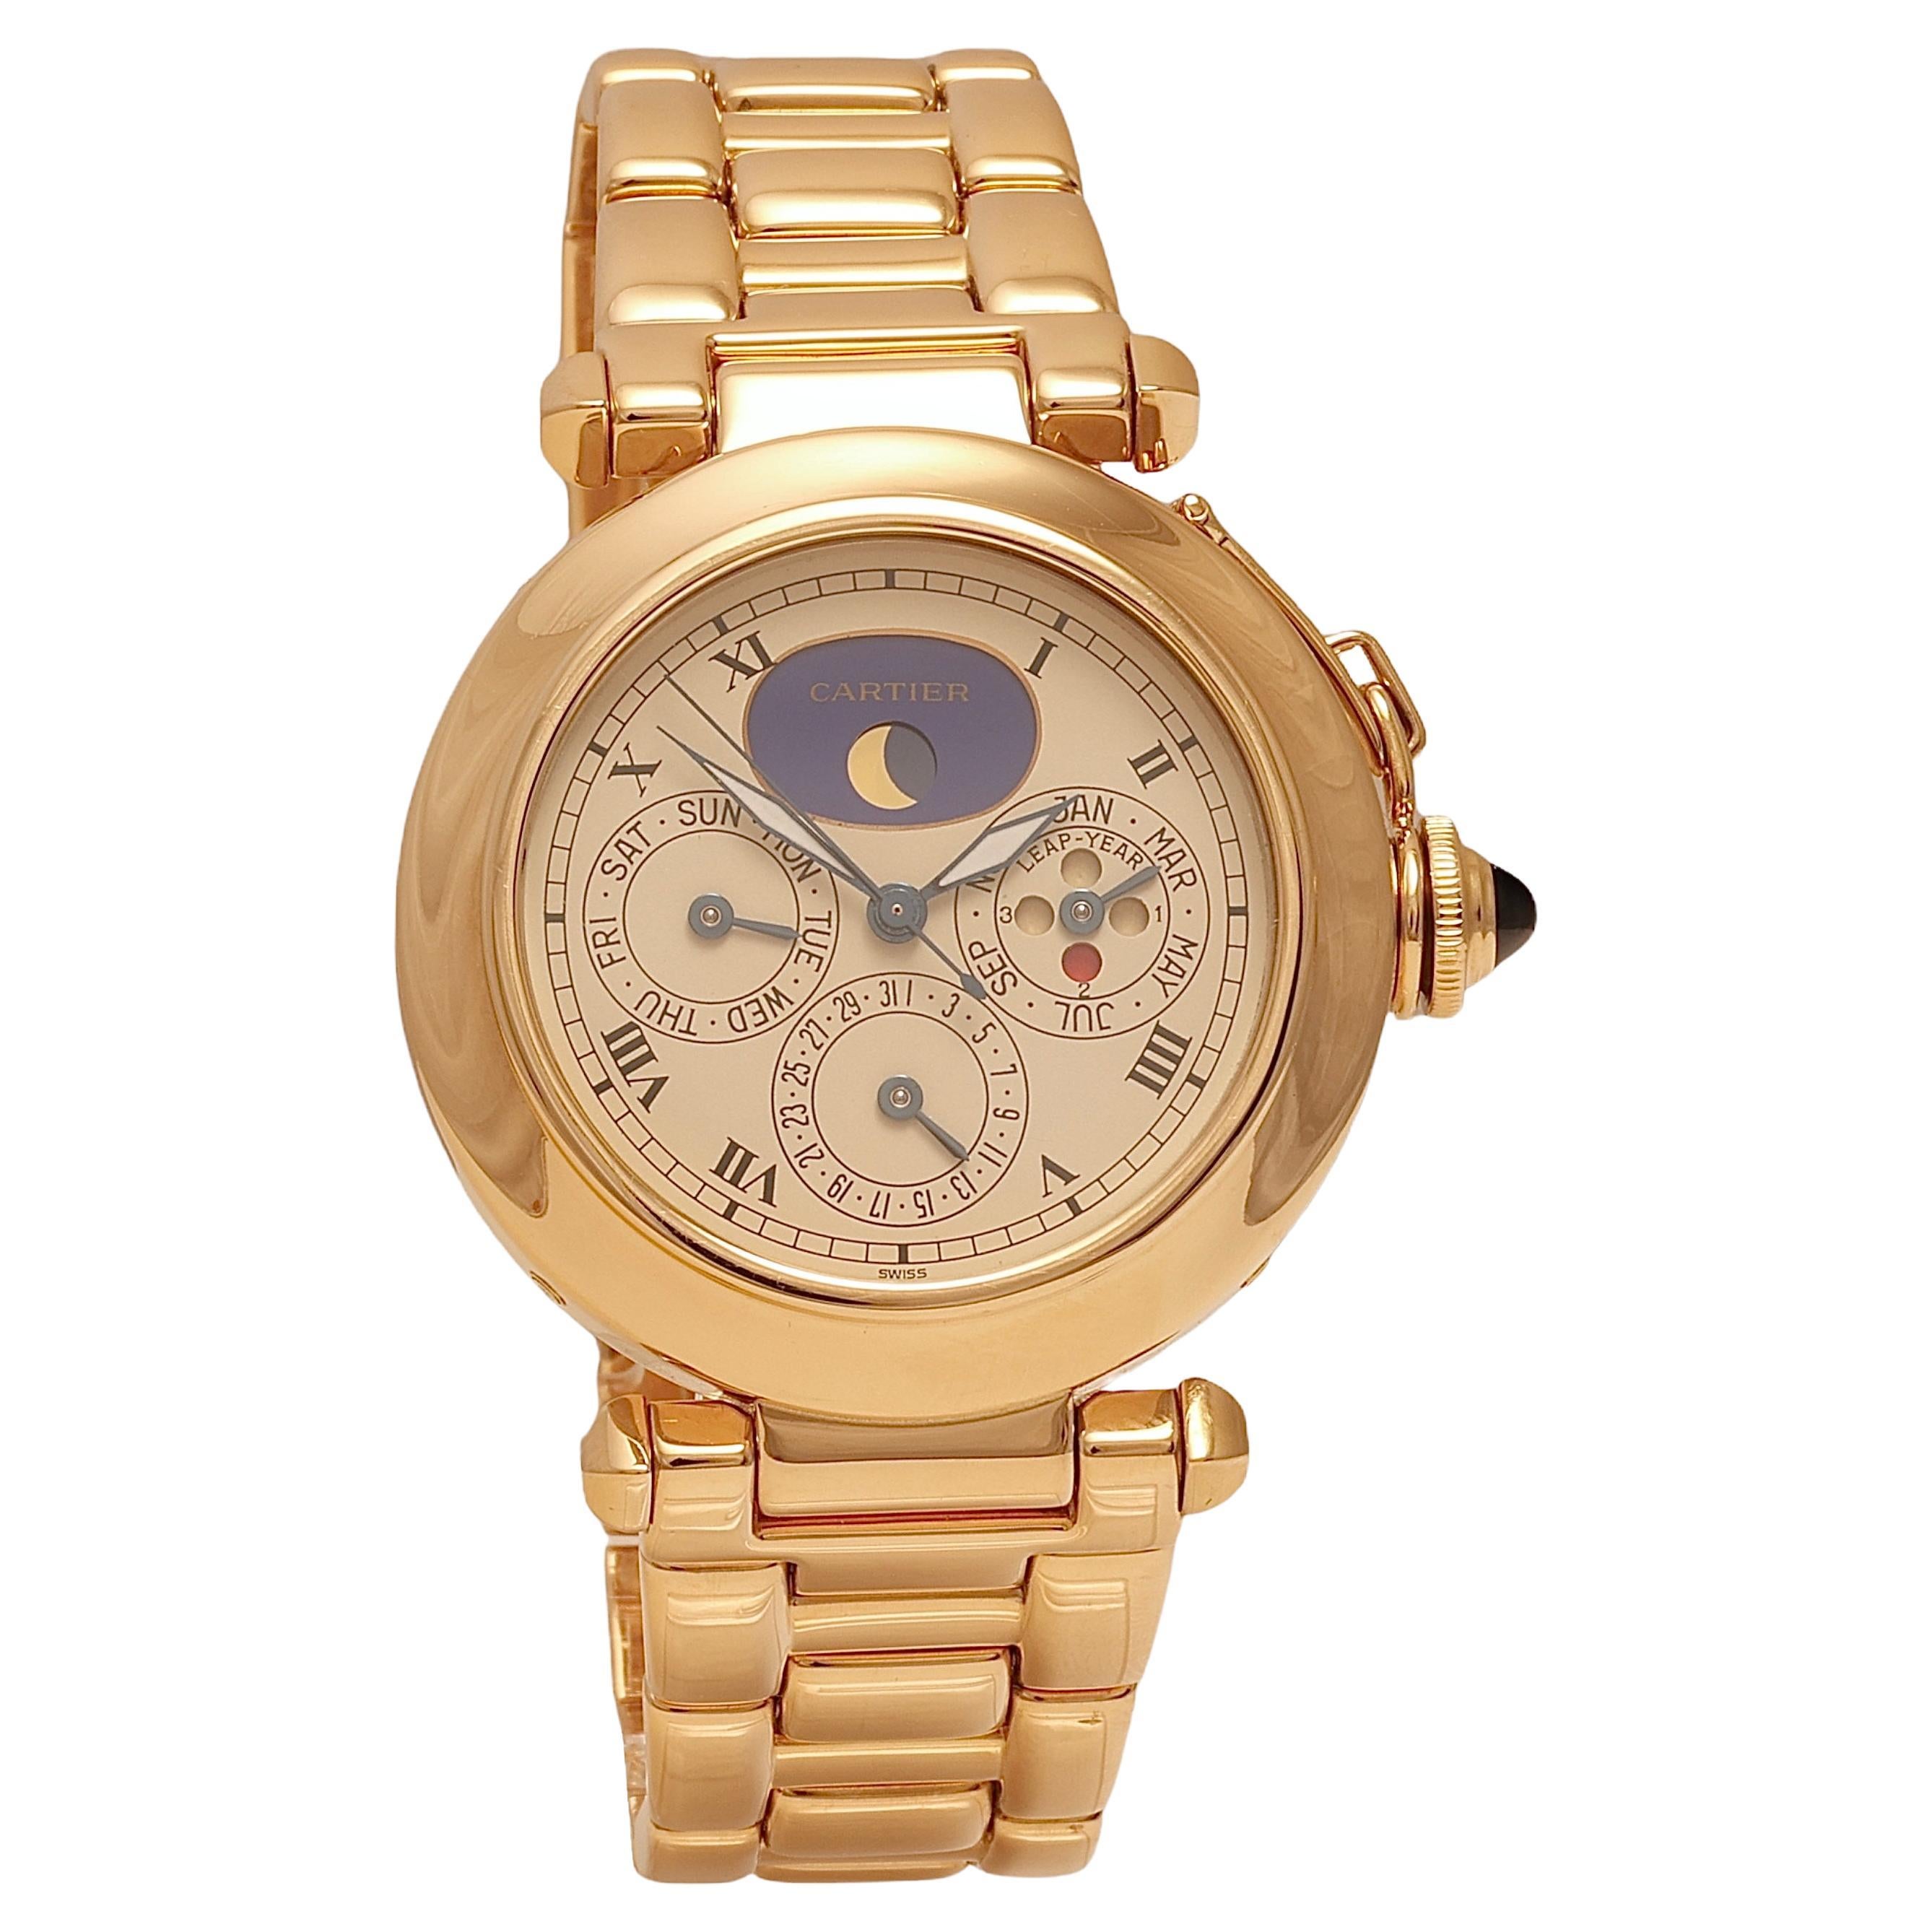 18 Kt Cartier Pasha Perpetual Calendar Wrist Watch, Day Date Month Moon Phase For Sale